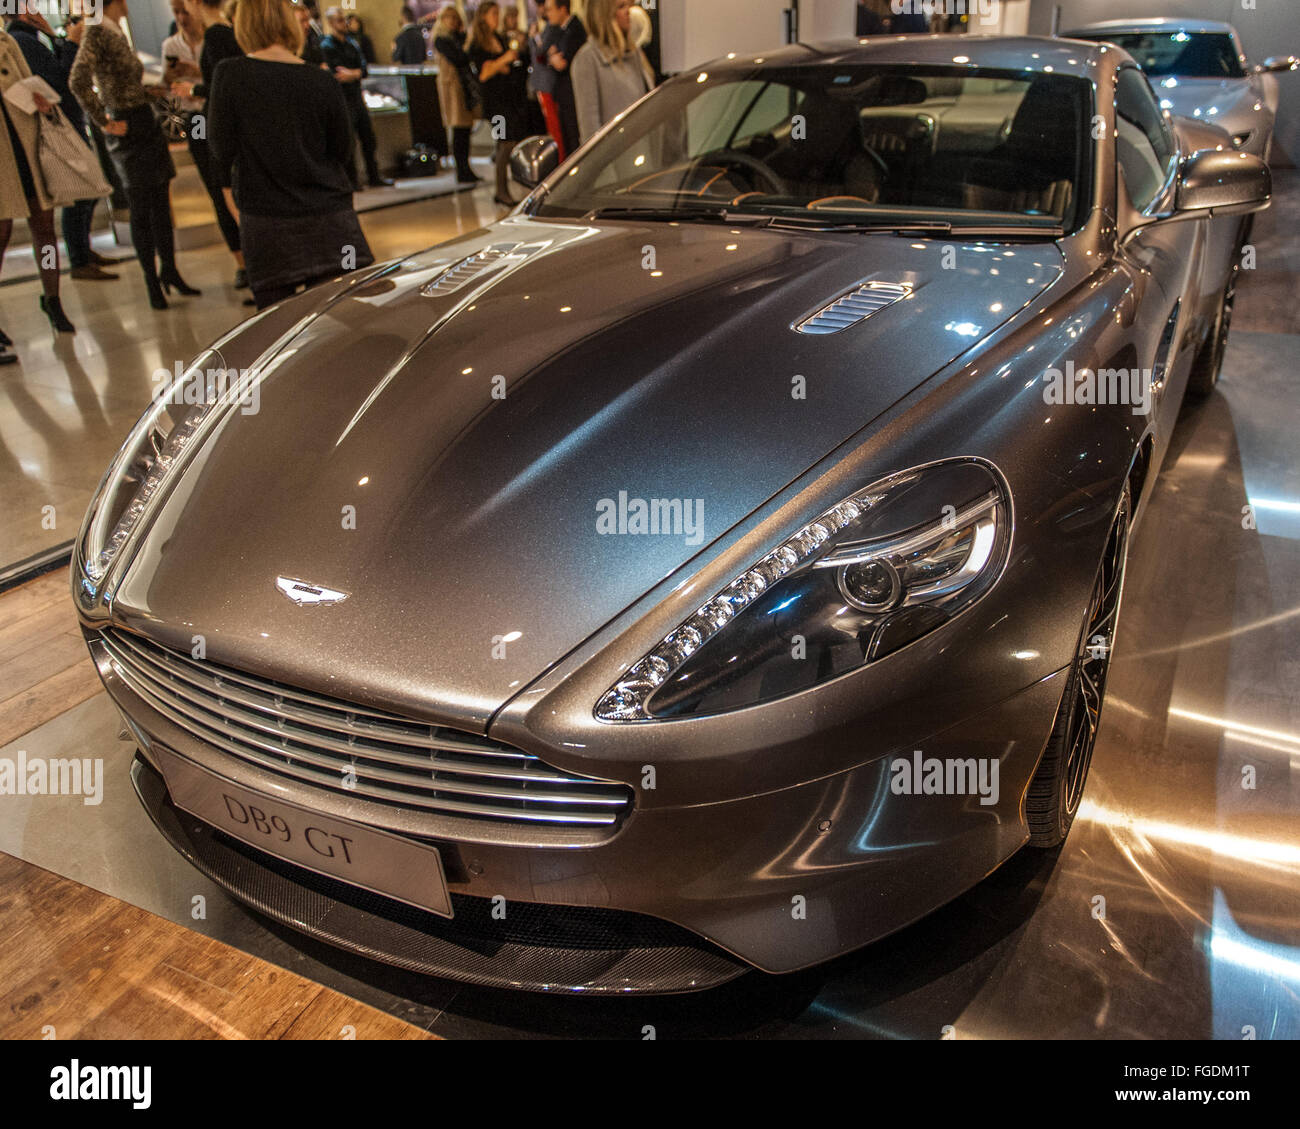 Three Aston Martin sports cars including the DB5 from Goldfinger and the DB10 from Spectre on display in Harrods.  Featuring: Aston Martin DB9 GT Where: London, United Kingdom When: 13 Jan 2016 Stock Photo